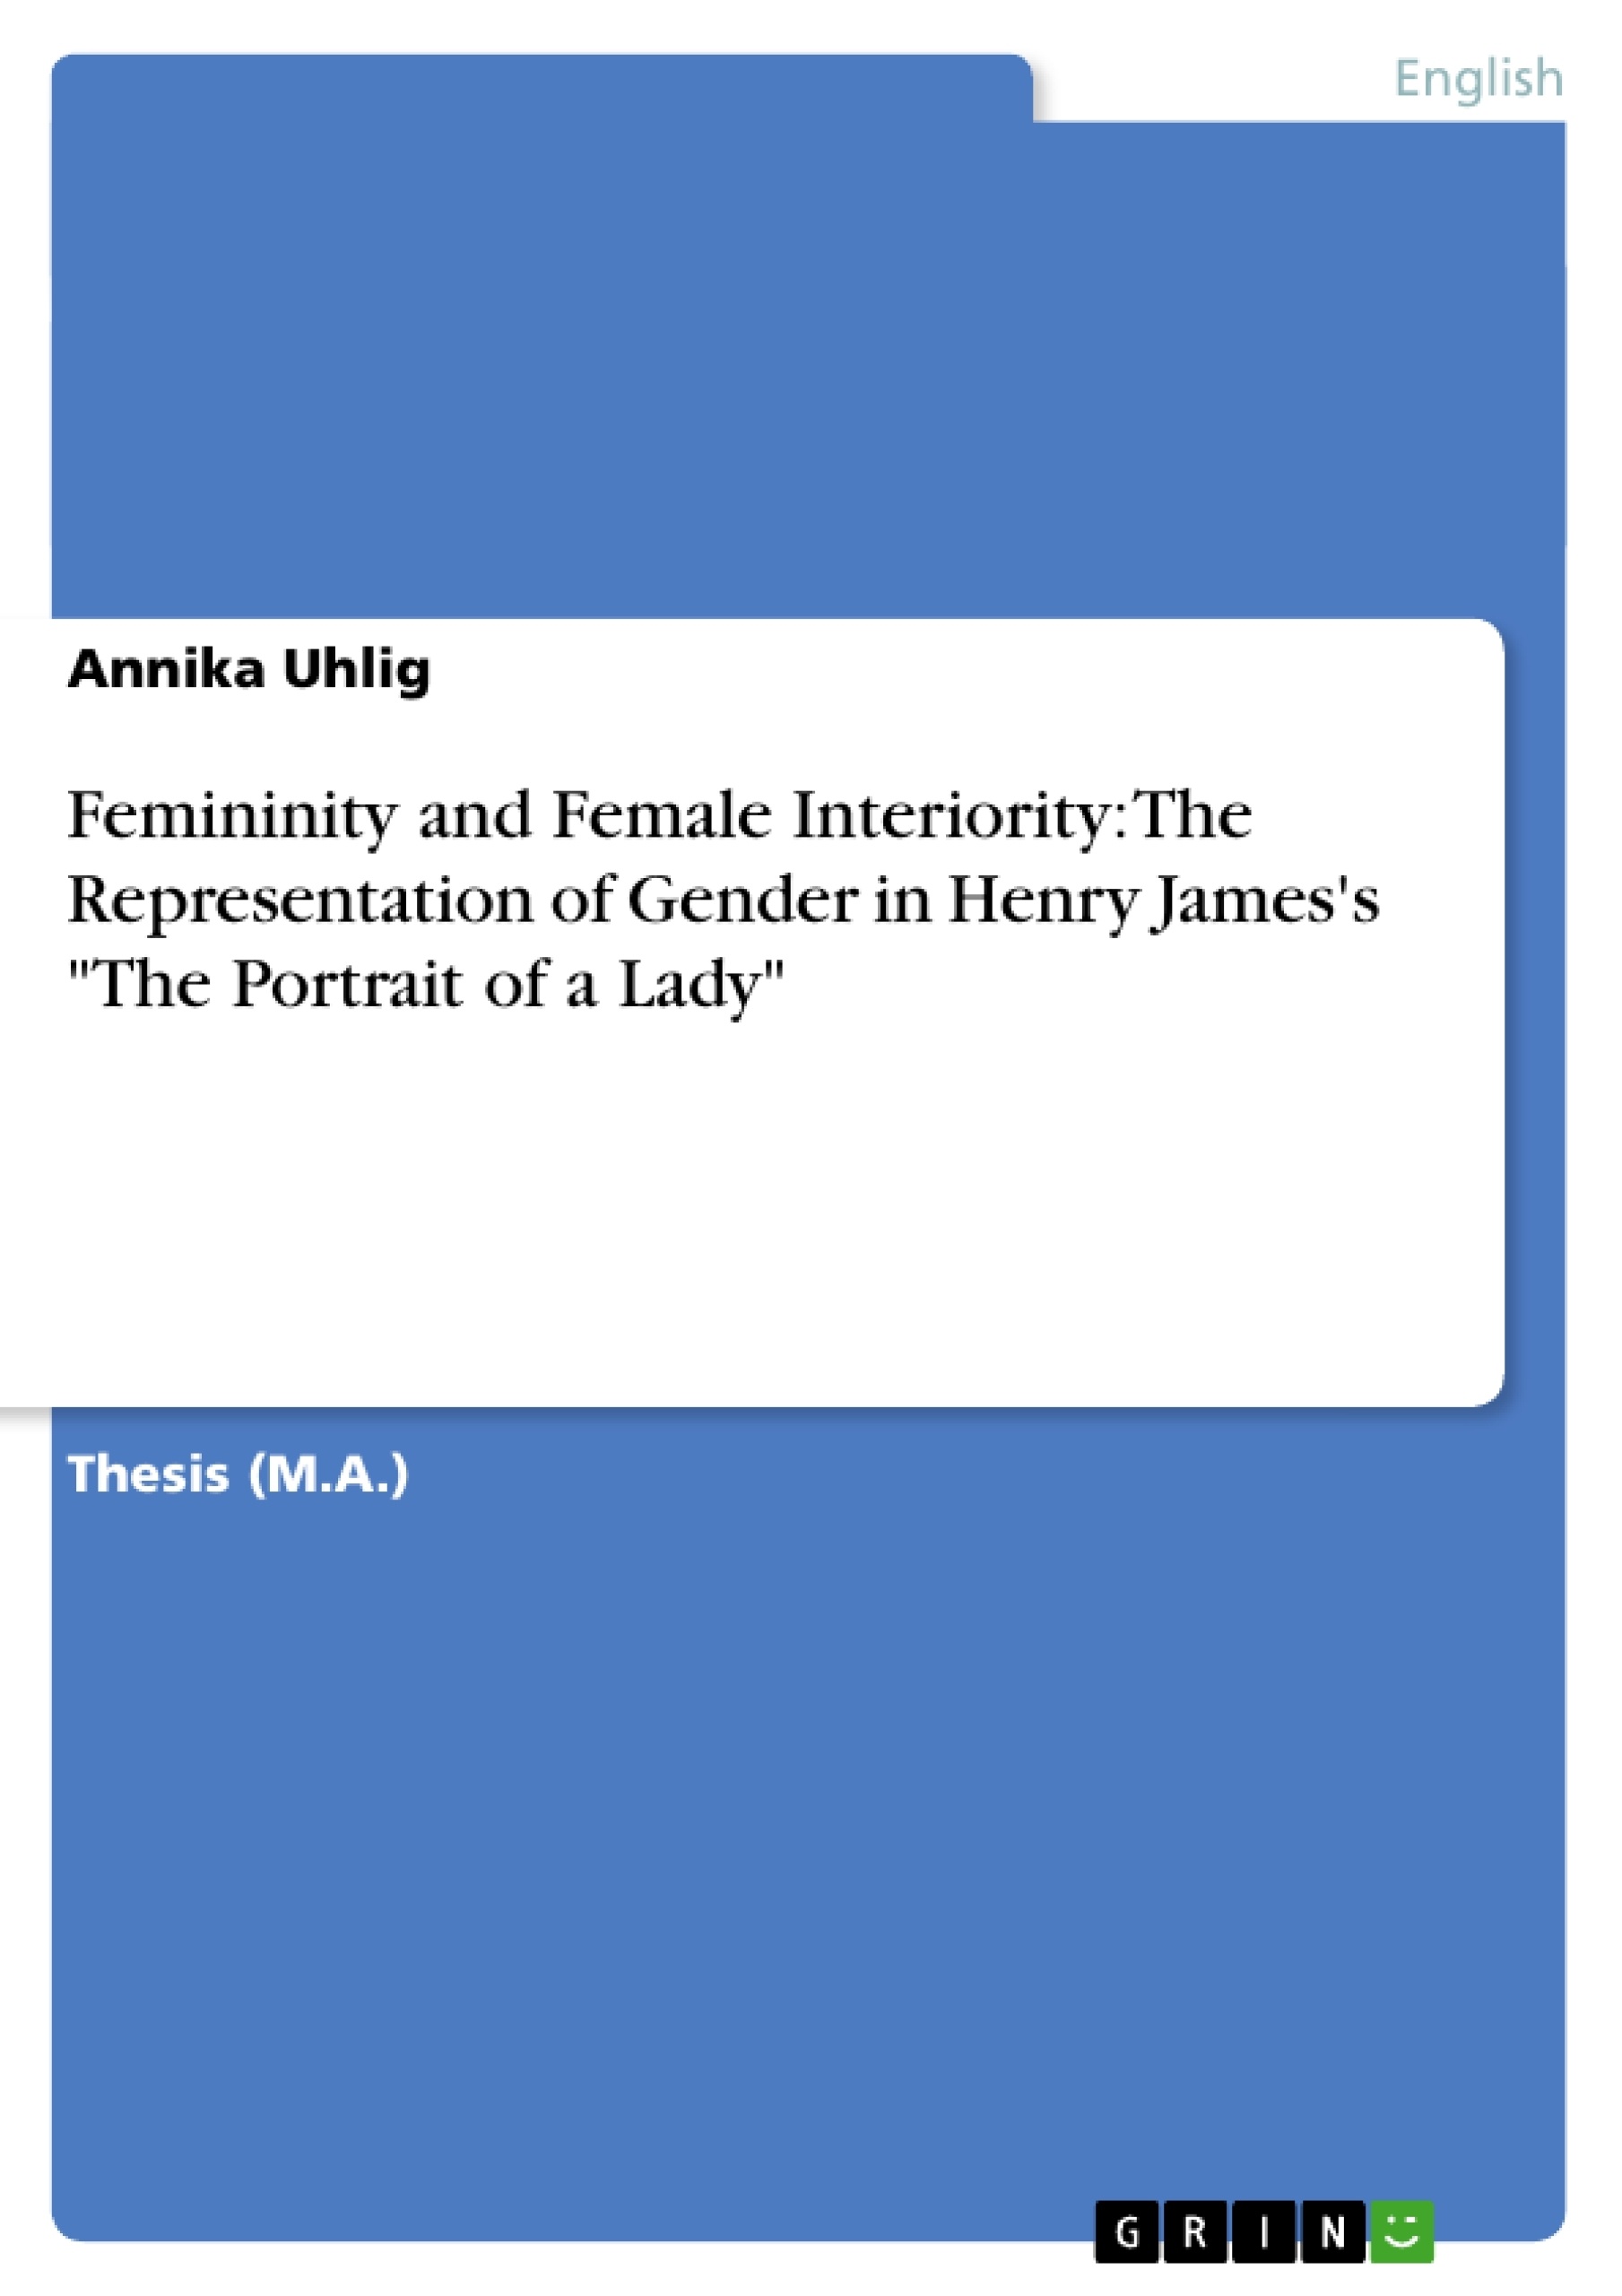 Title: Femininity and Female Interiority: The Representation of Gender in Henry James's "The Portrait of a Lady"